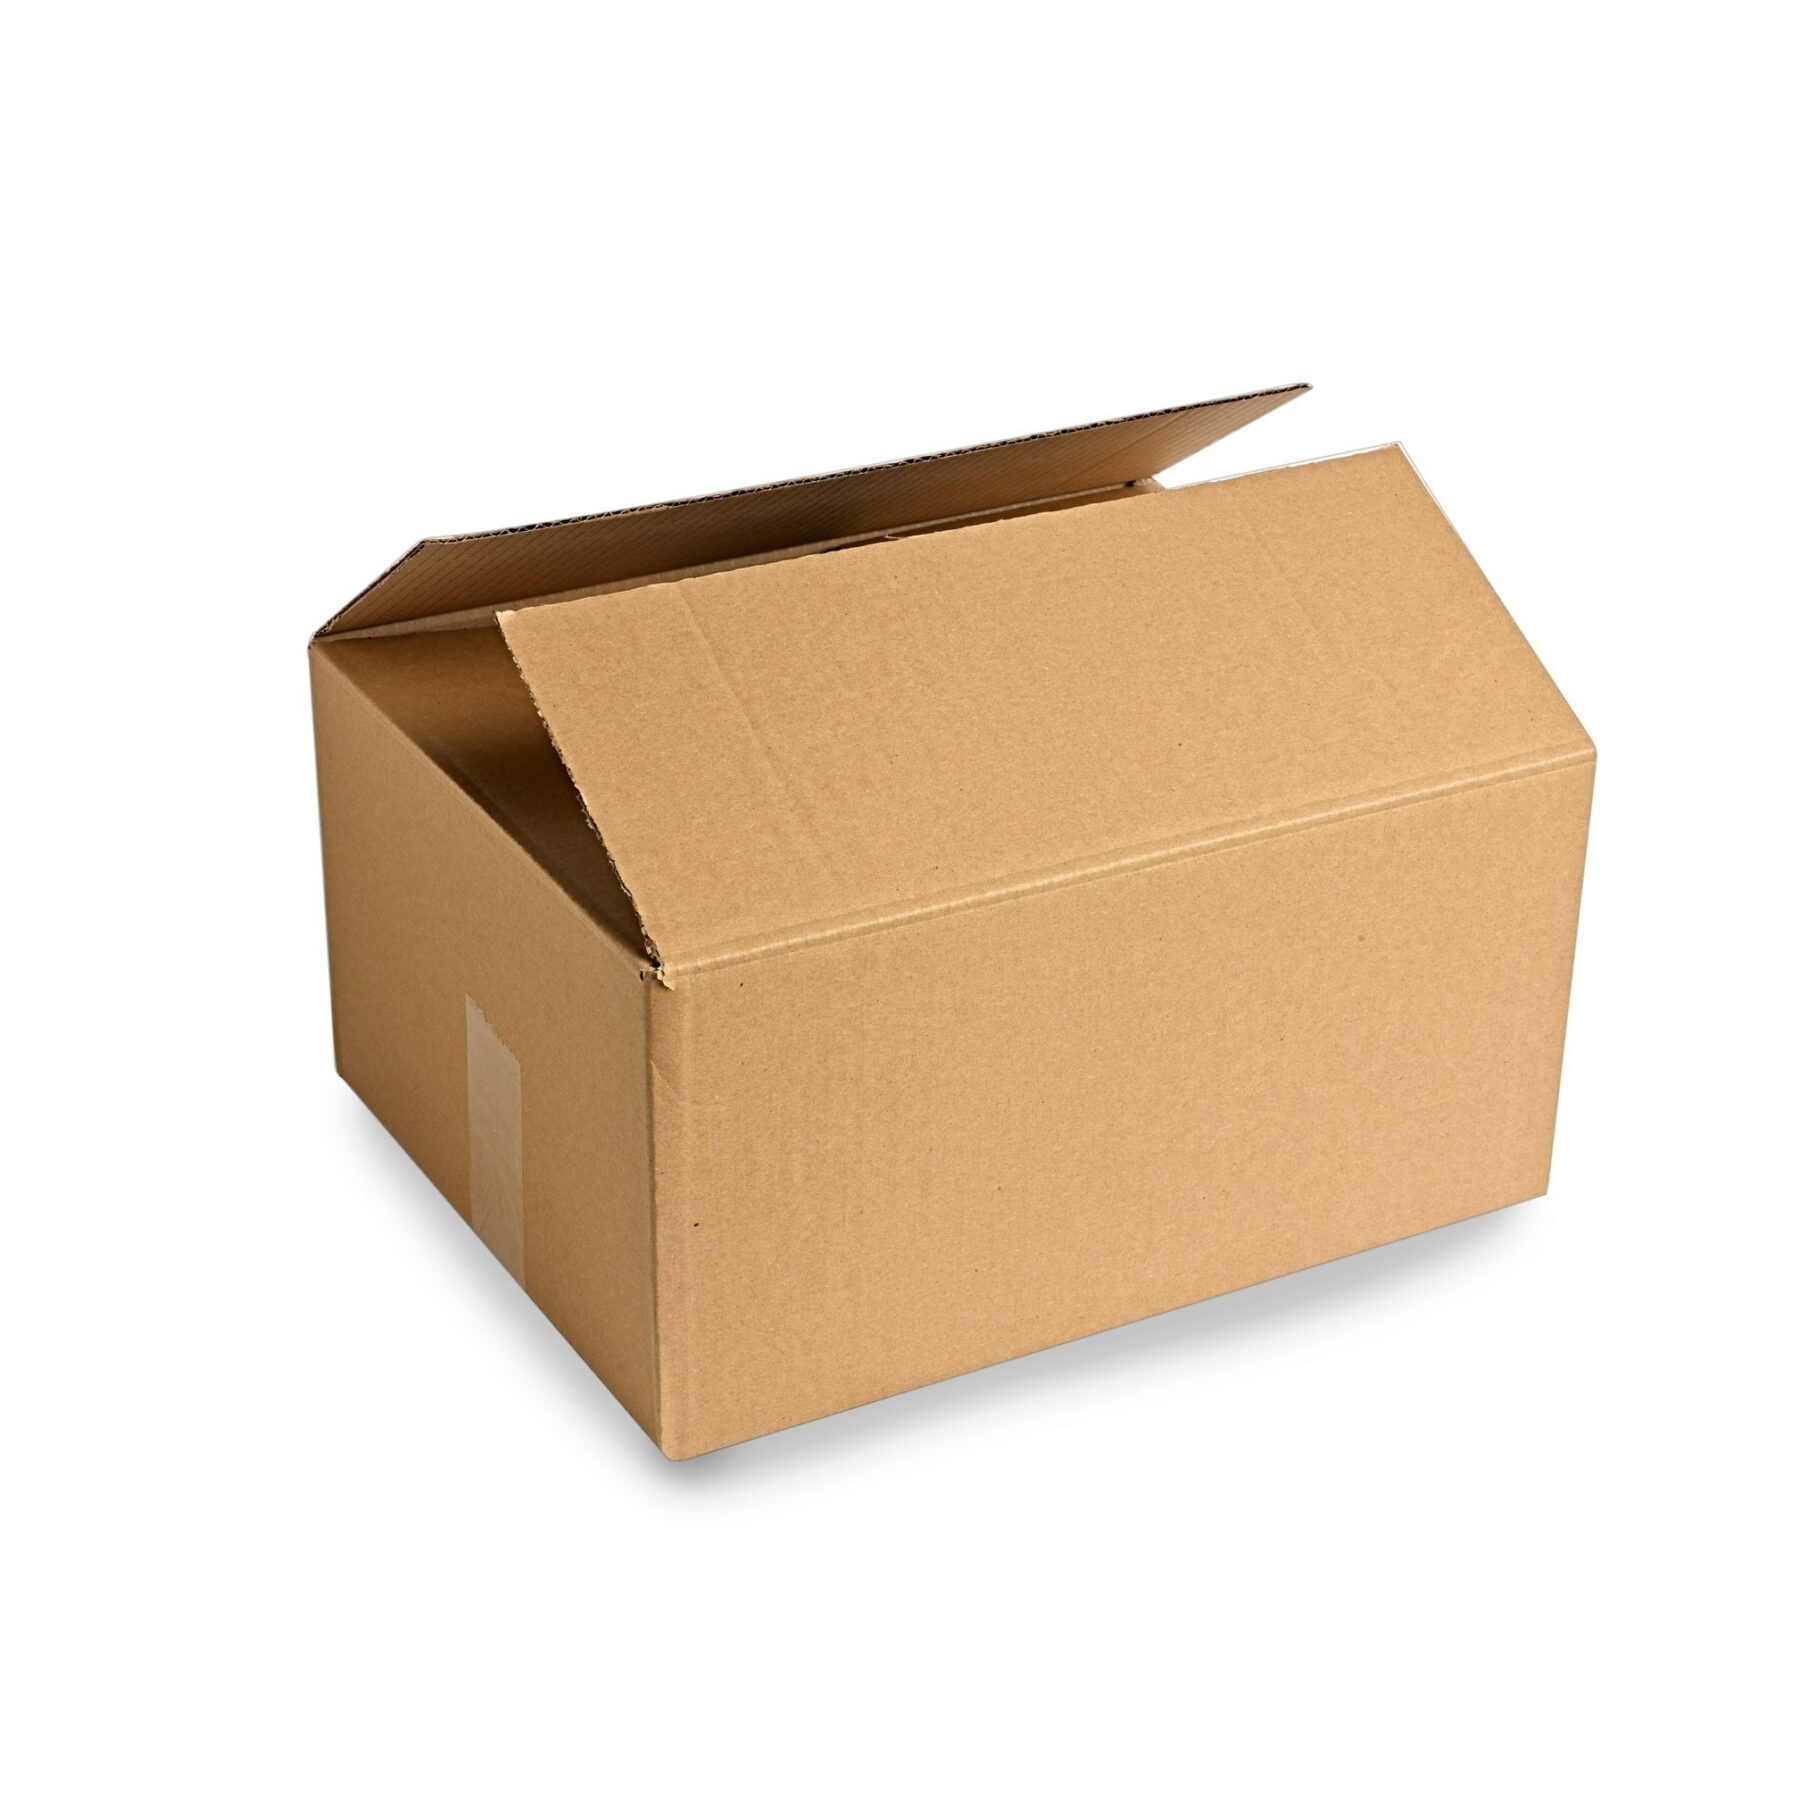 Cardboard Outer Box for sending packing and transiting hampers